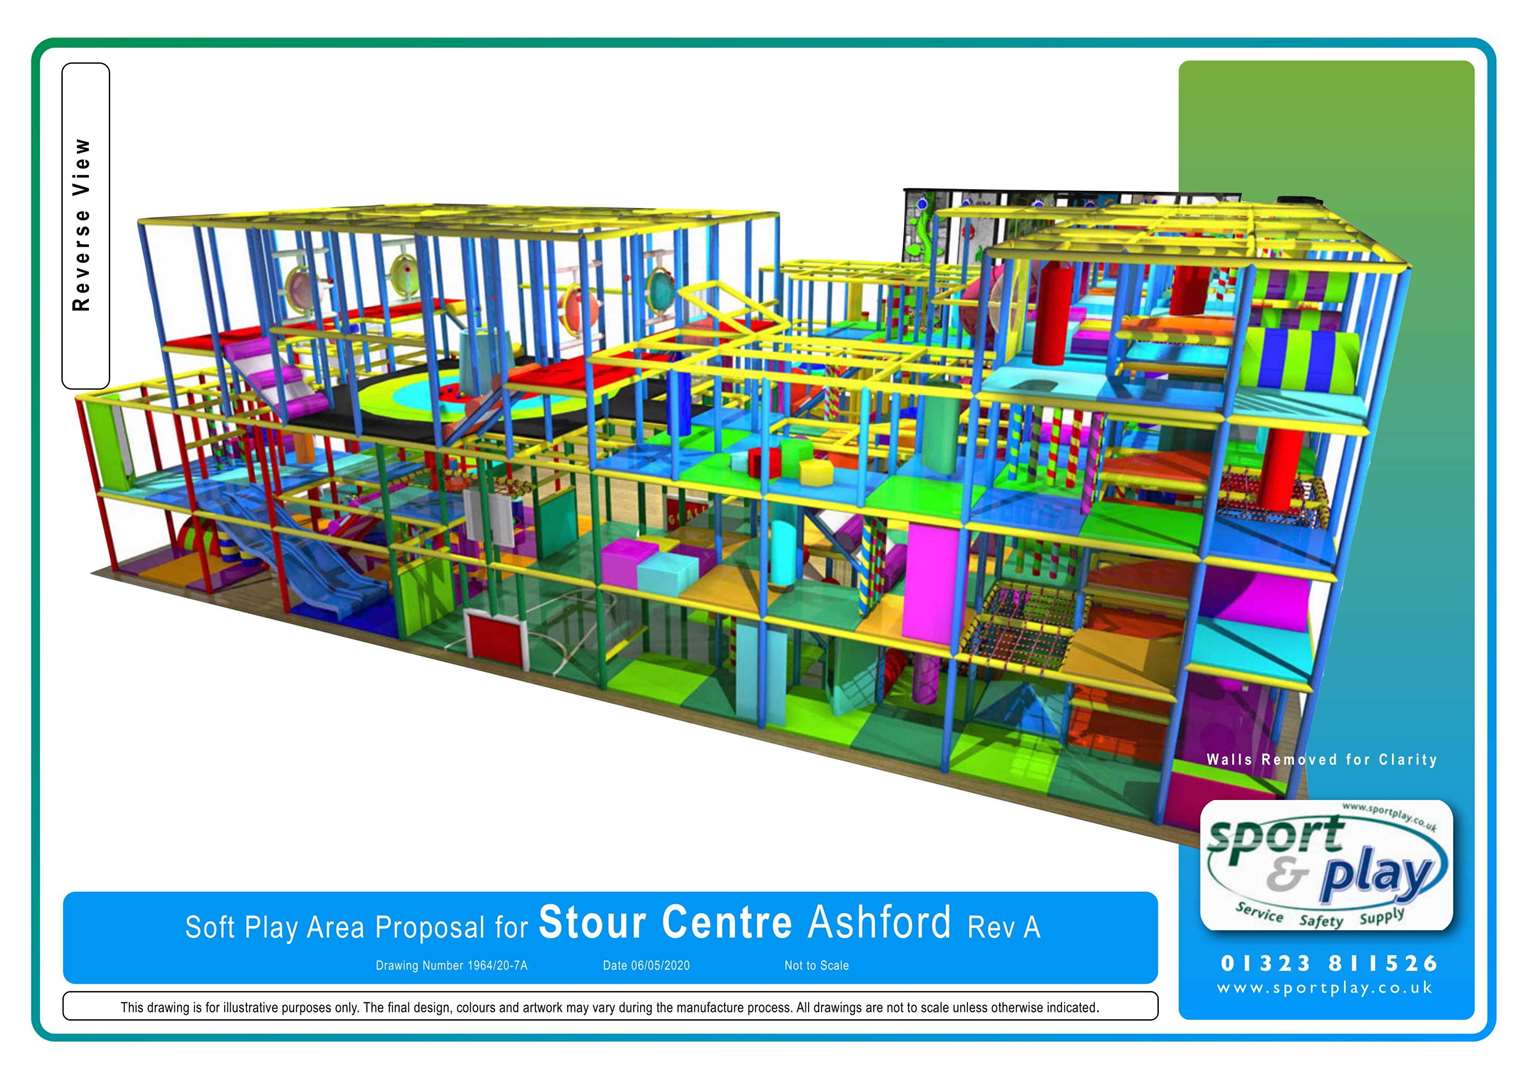 CGIs show how large the play area will be